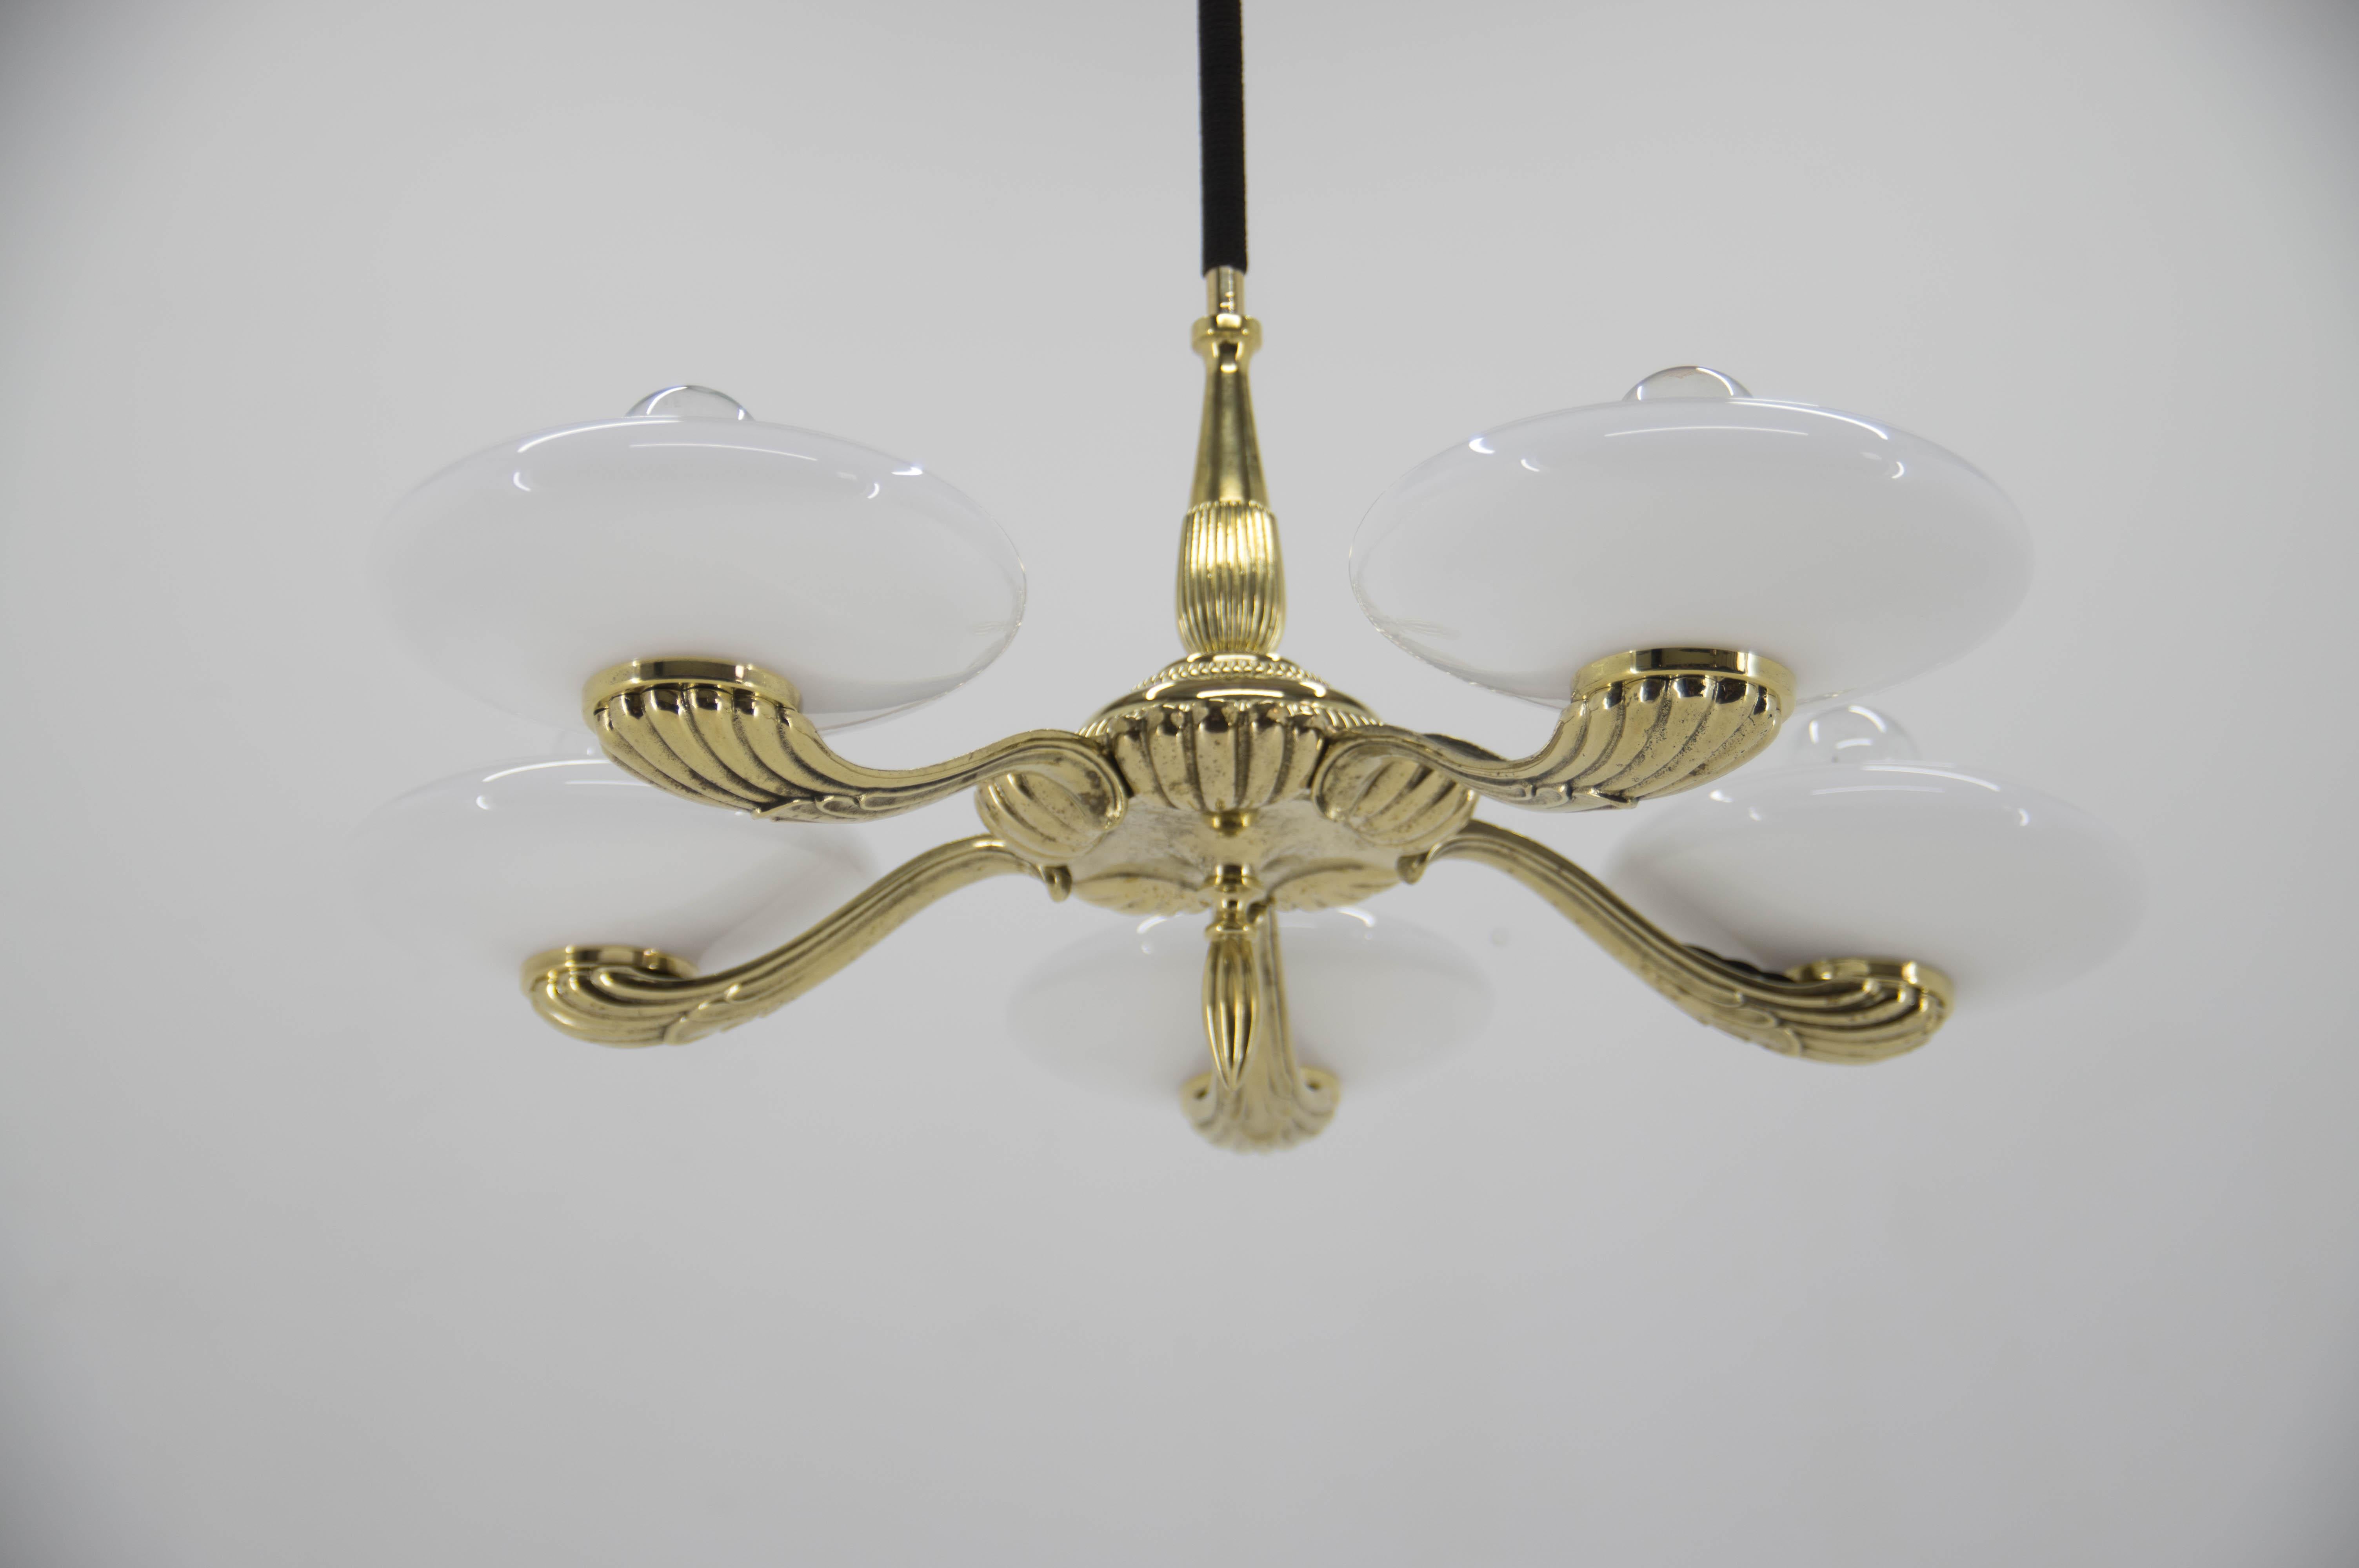 Large Art Nouveau Brass and Glass Chandelier, 1910s, Restored For Sale 6